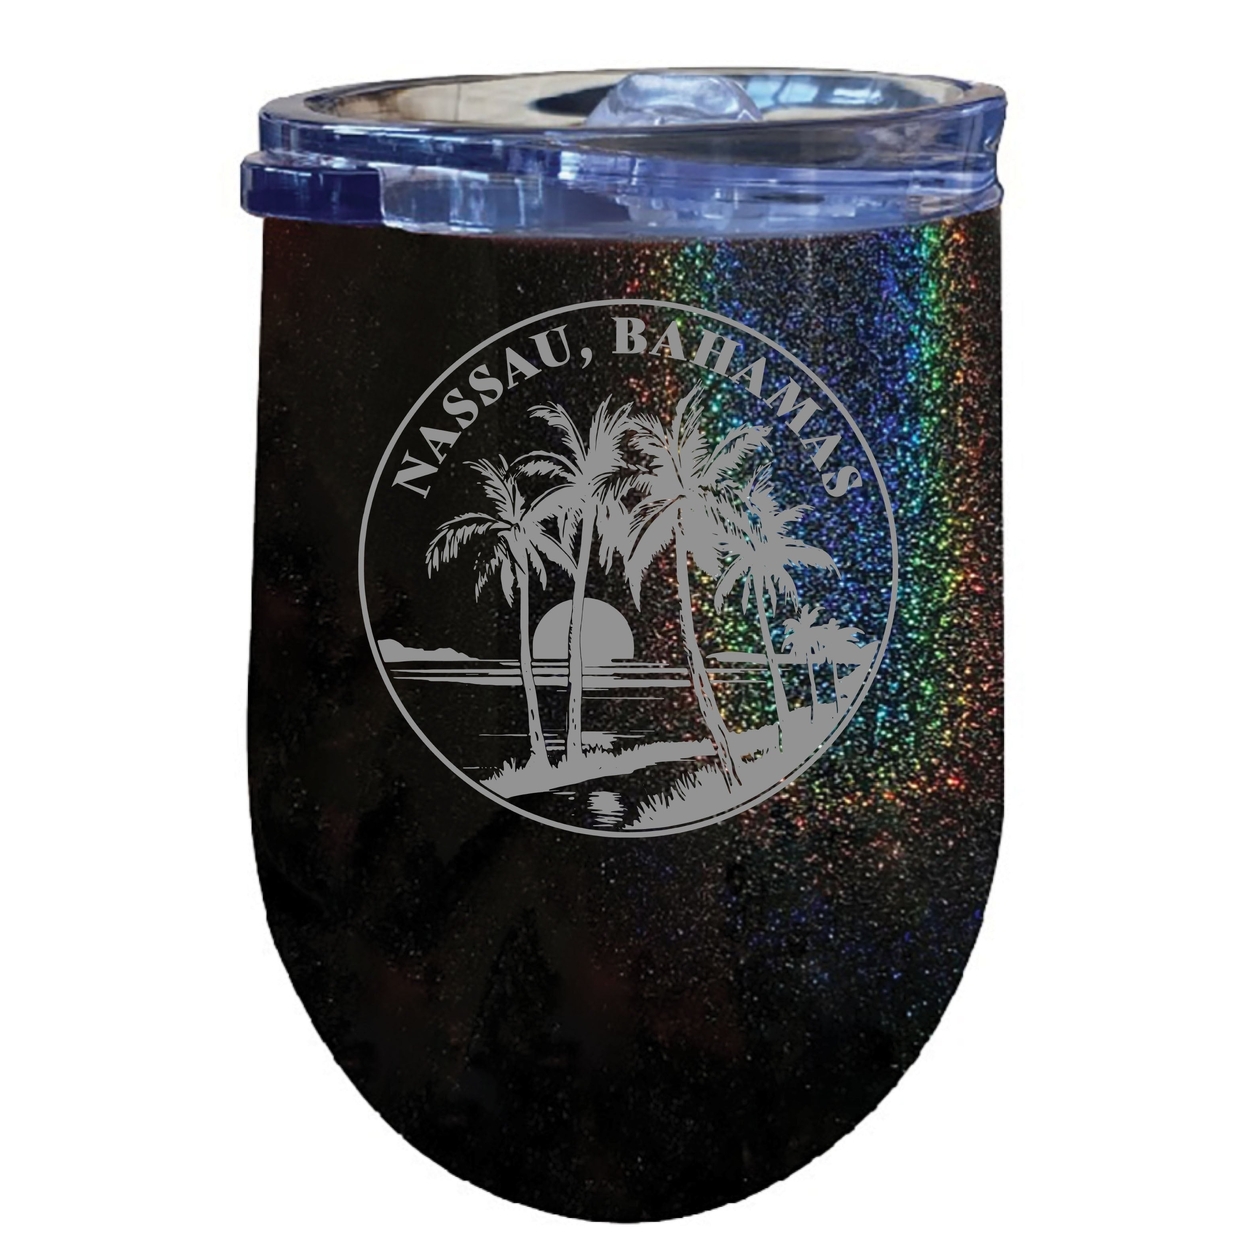 Nassau The Bahamas Souvenir 12 Oz Engraved Insulated Wine Stainless Steel Tumbler - Coral,,Single Unit